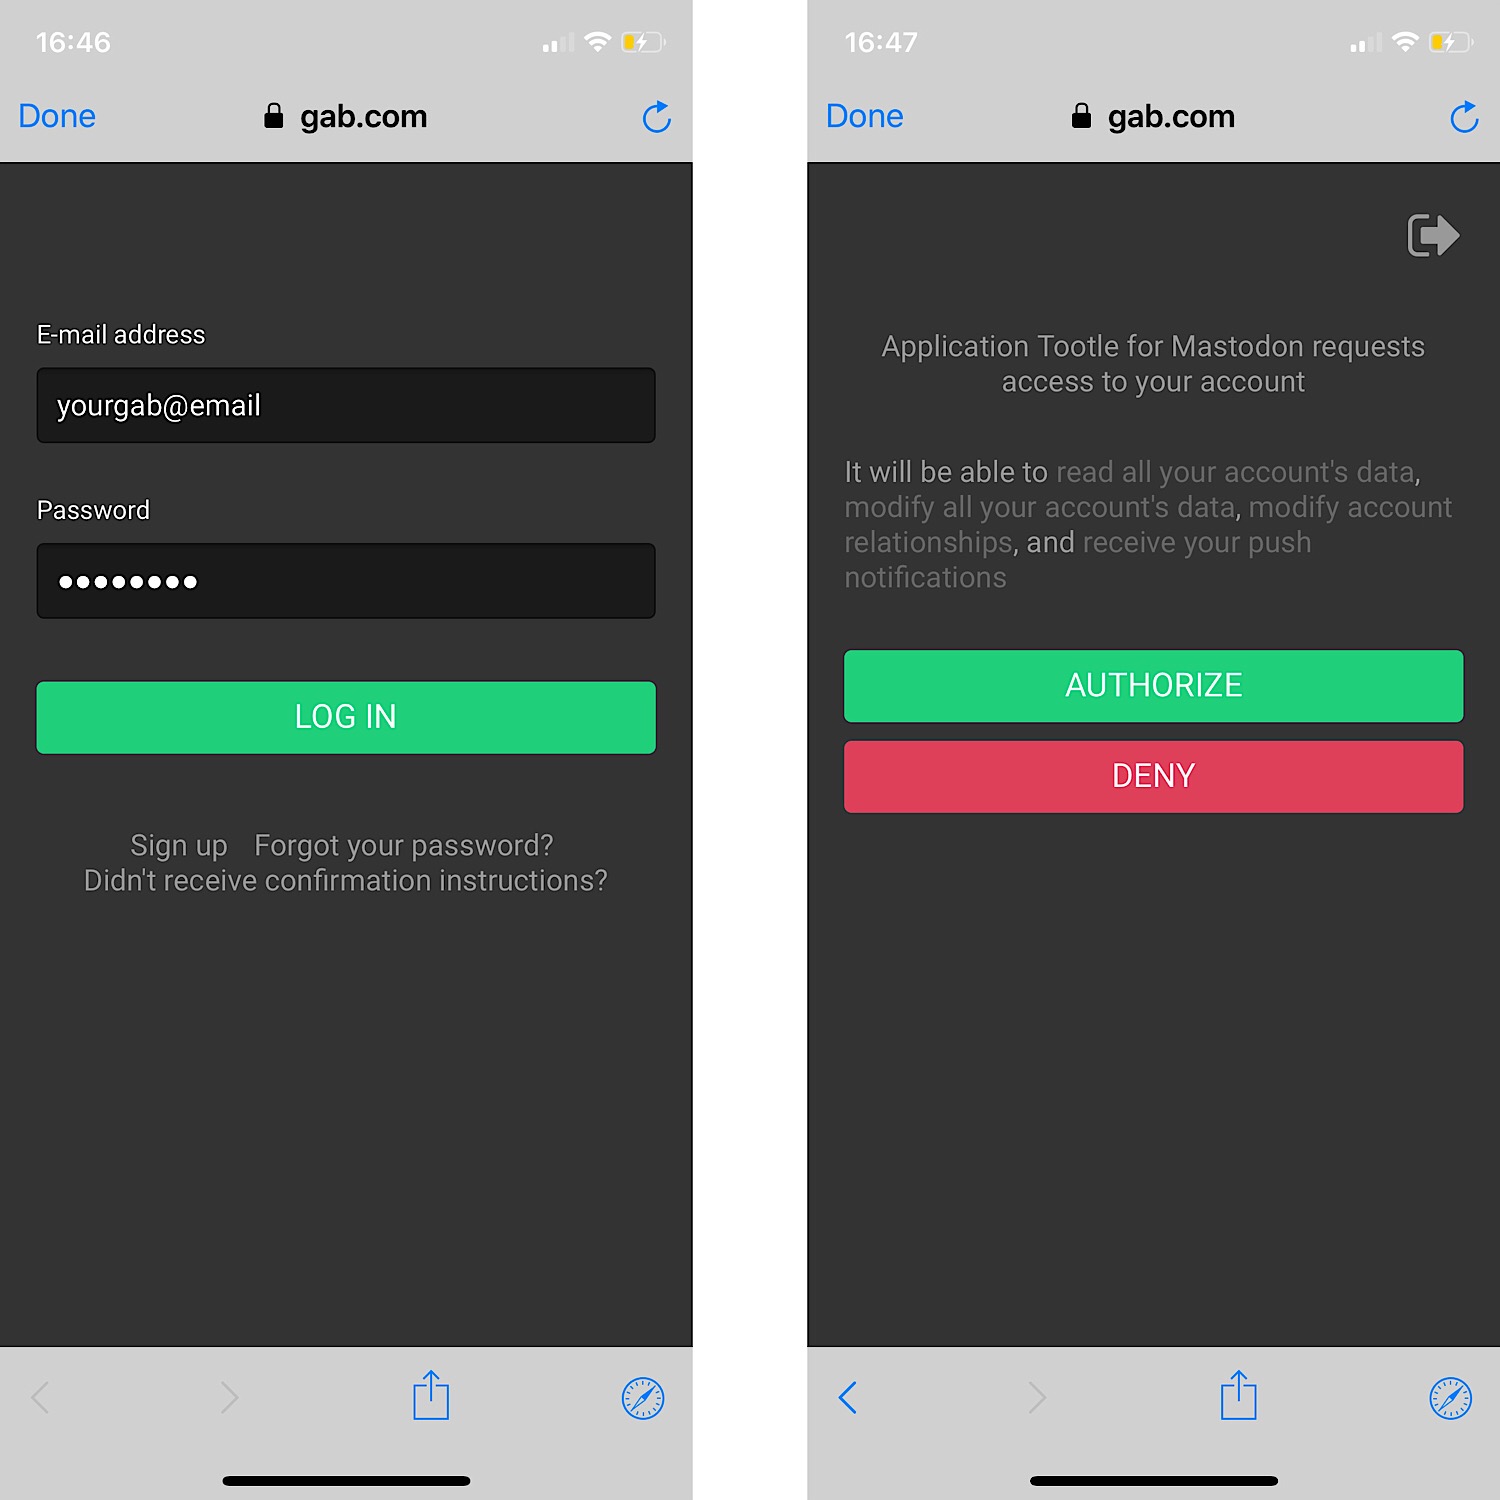 The Gab log in screen and authorize screen in the Tootle for Mastodon app.